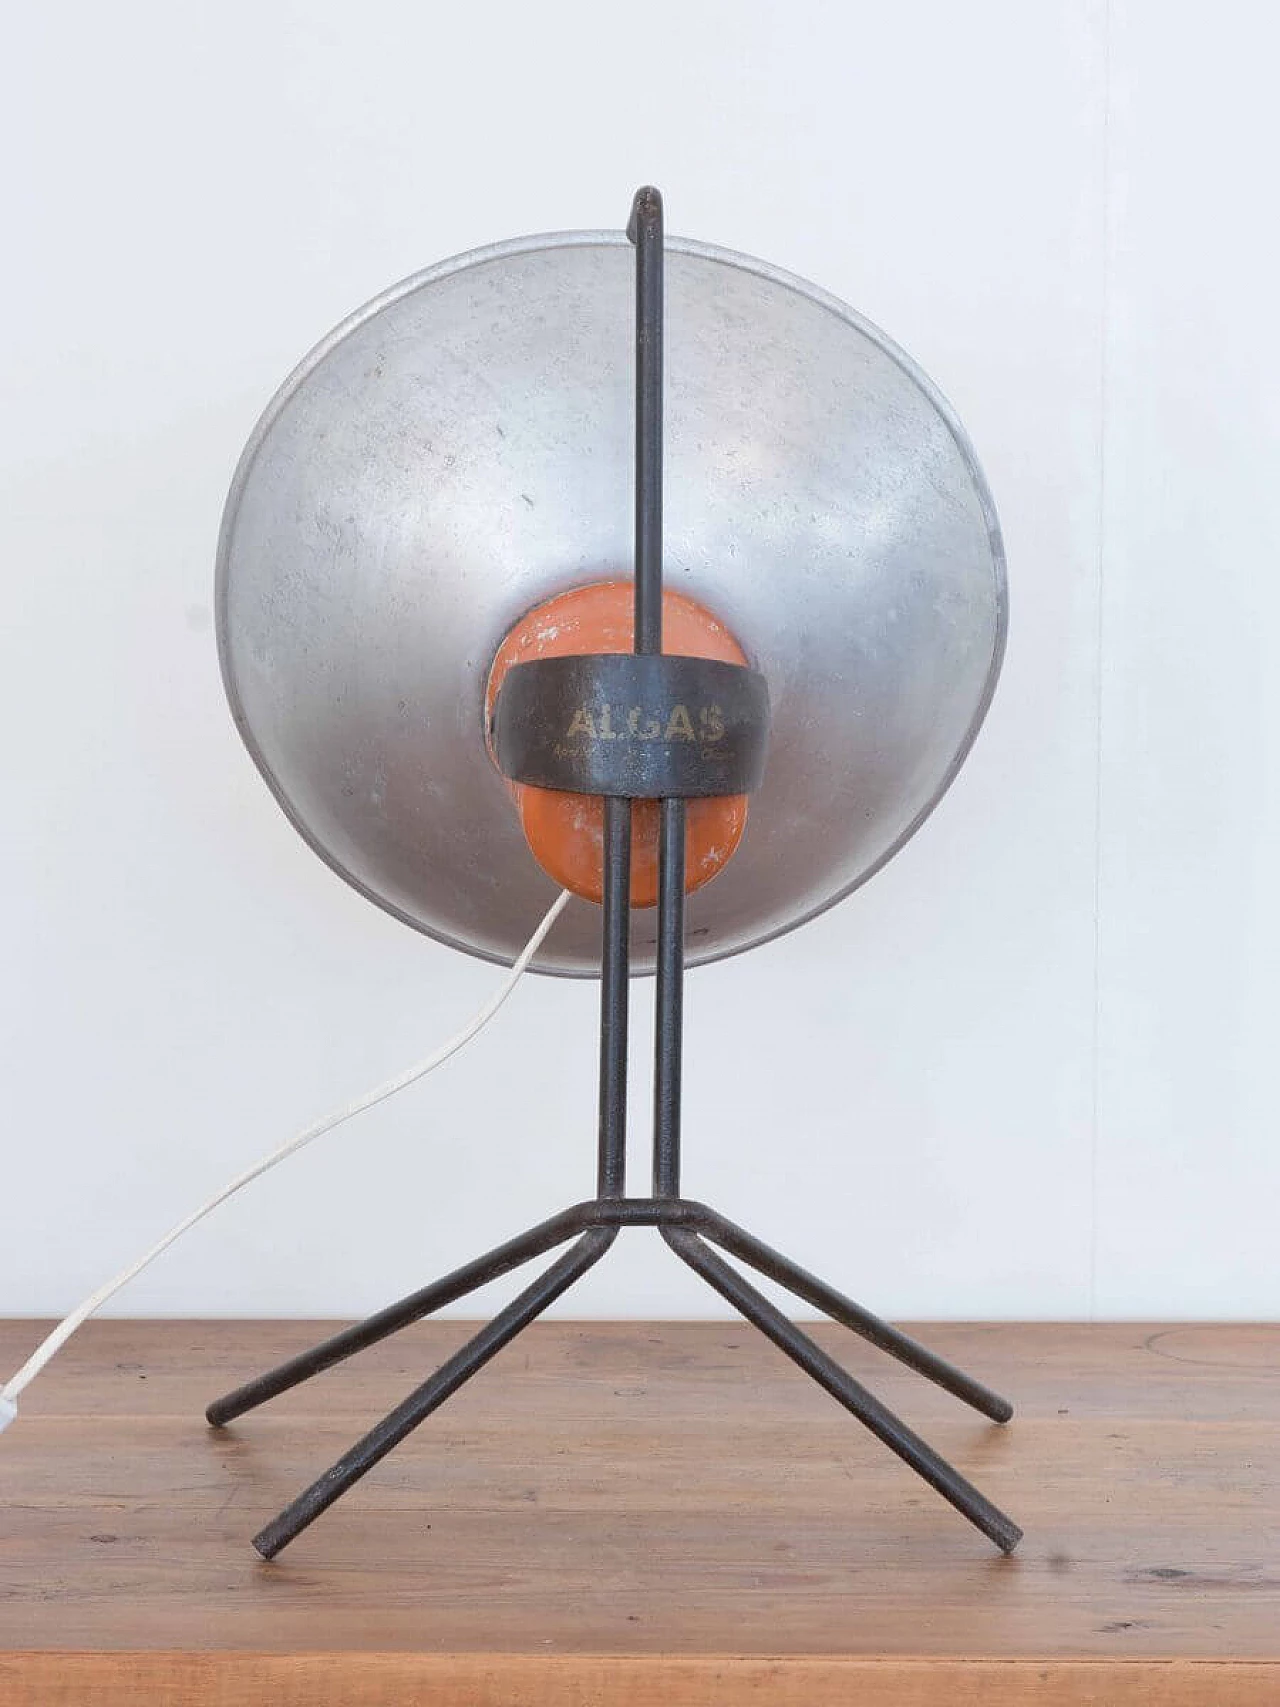 Industrial Italian Aluminum And Iron Table Lamp From Algas, 1960s 1086935